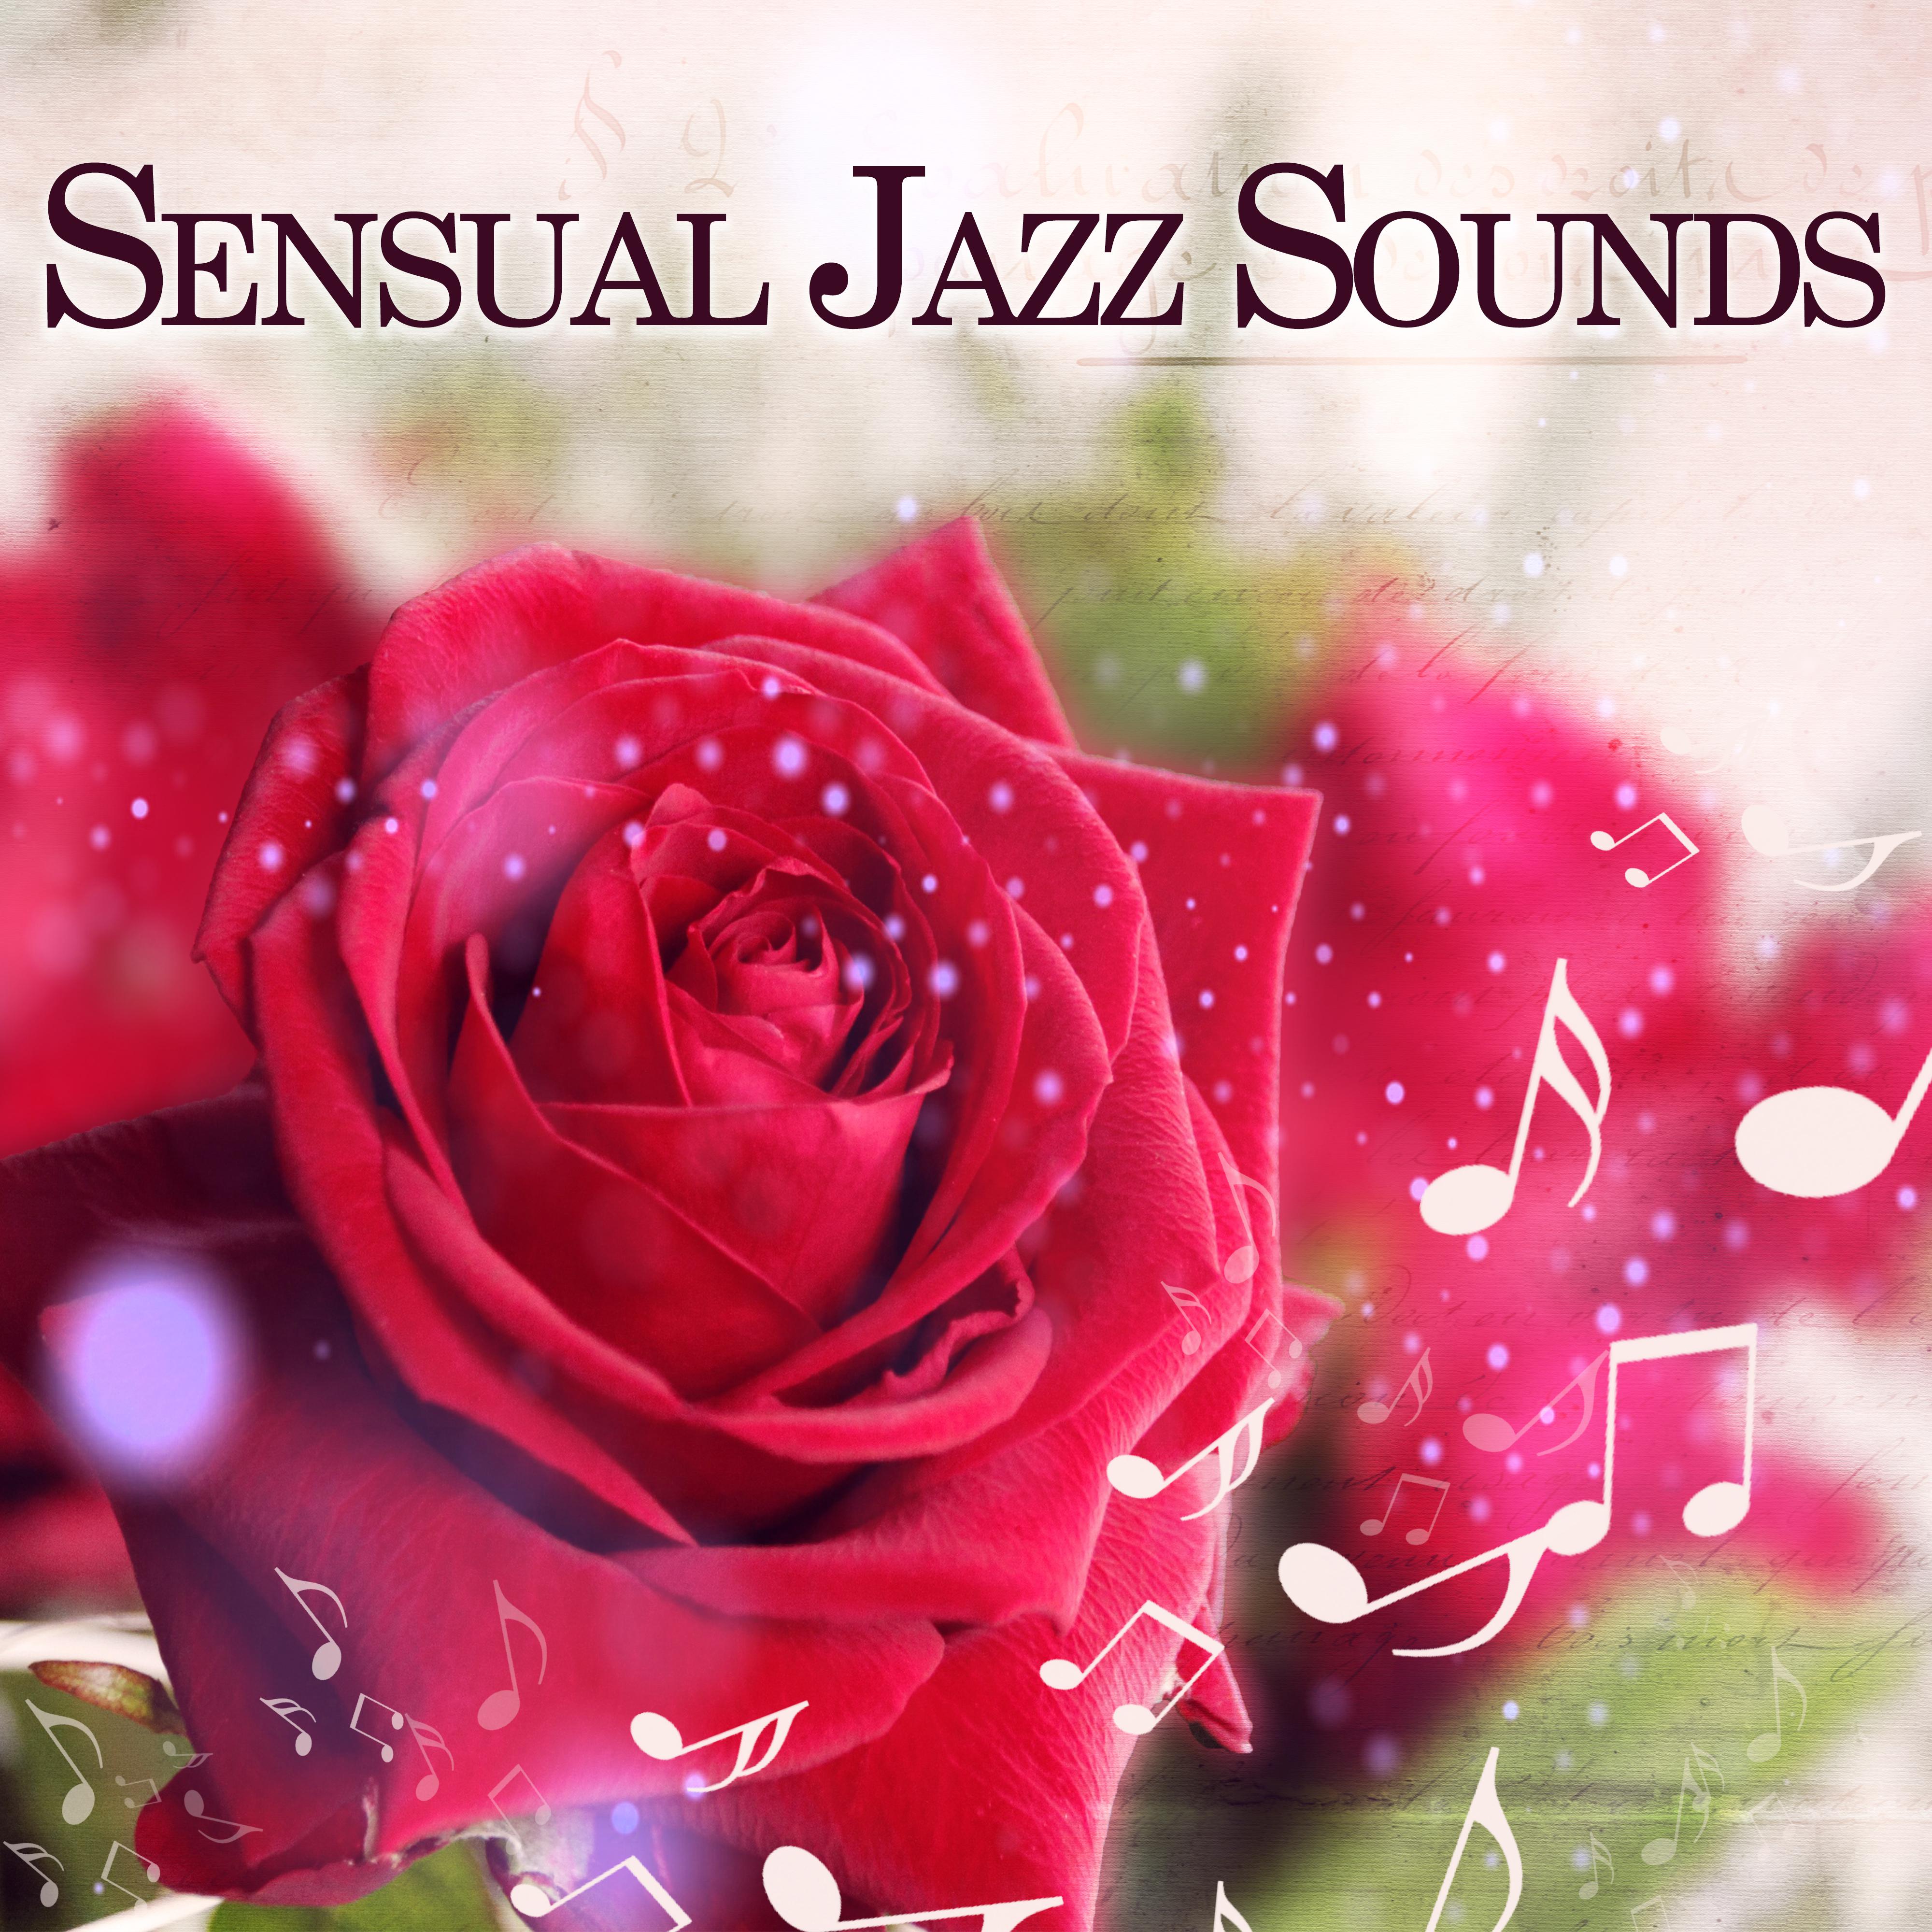 Sensual Jazz Sounds  Music to Relax, Romantic Jazz Note, Sexy Massage, Erotic Moves